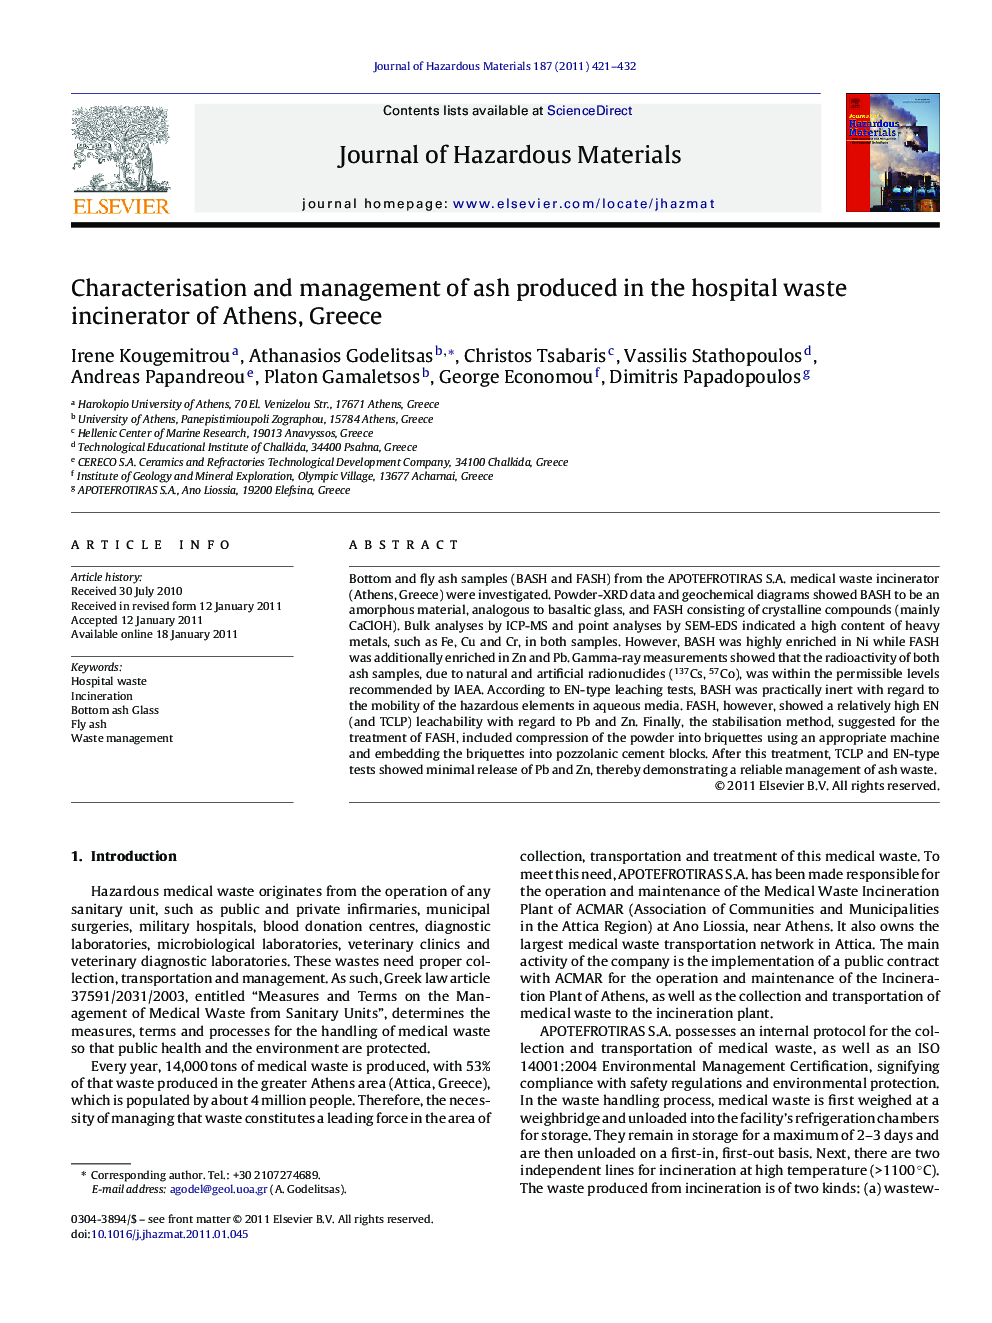 Characterisation and management of ash produced in the hospital waste incinerator of Athens, Greece